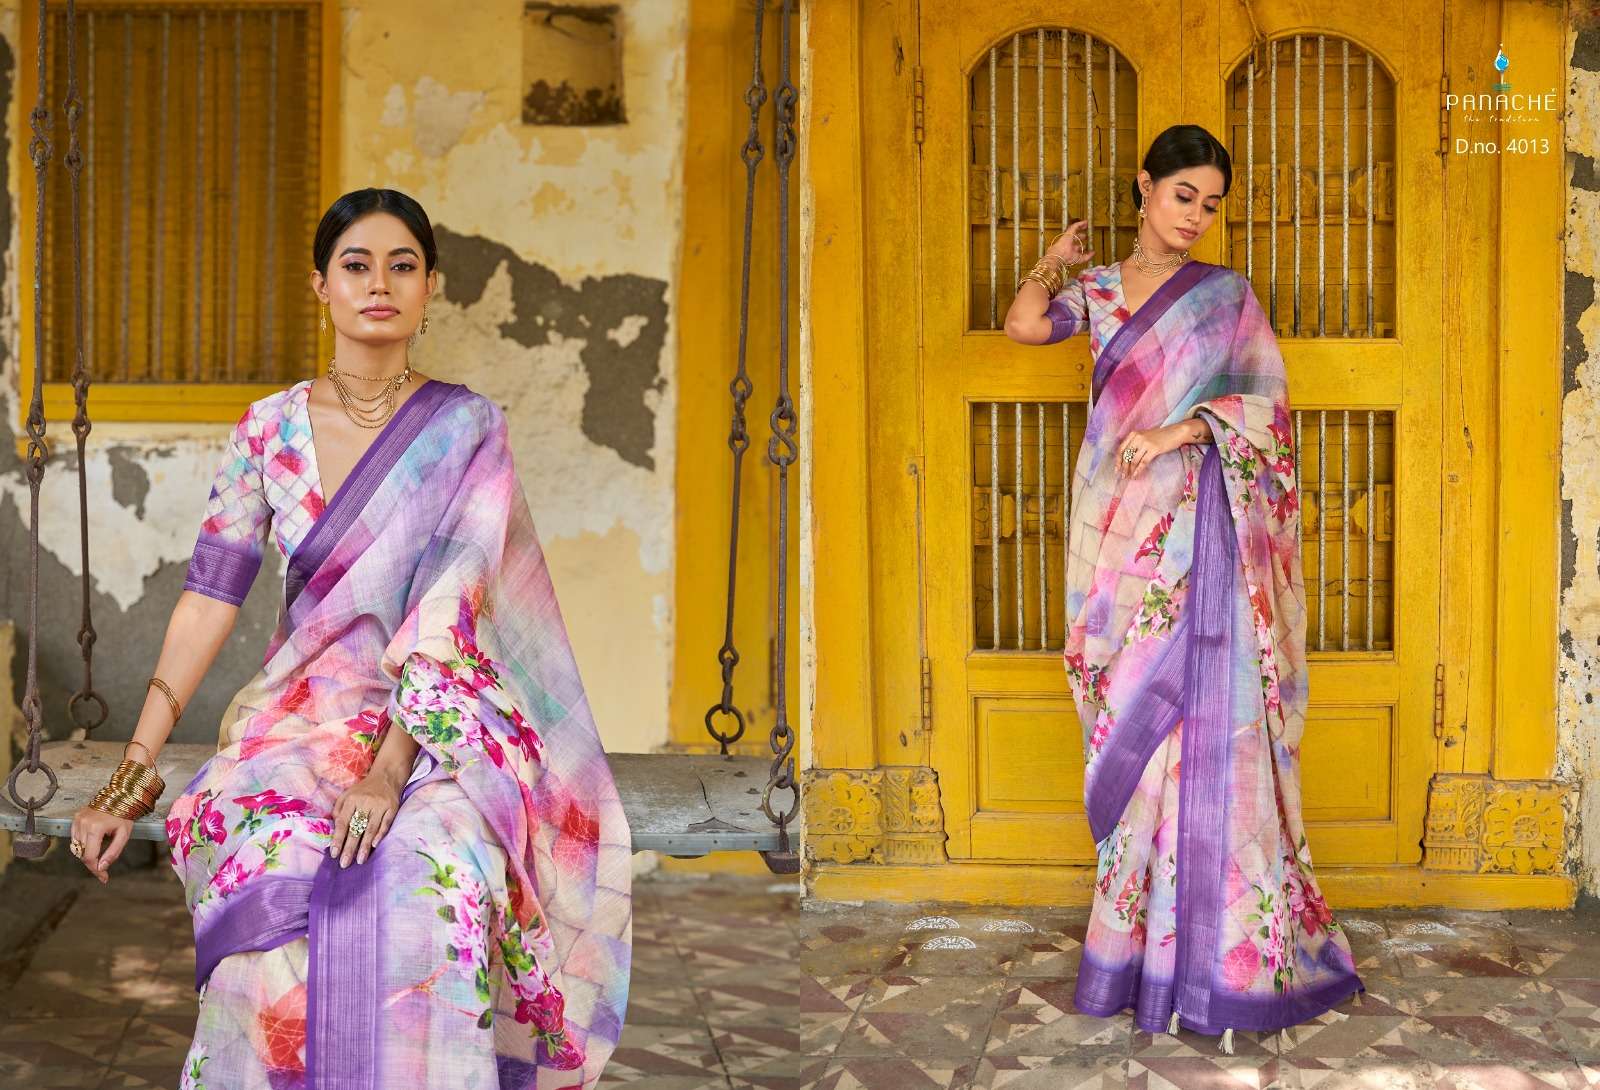 Saanvi Vol-2 By Panache 4011 To 4019 Series Indian Traditional Wear Collection Beautiful Stylish Fancy Colorful Party Wear & Occasional Wear Linen Digital Print Sarees At Wholesale Price